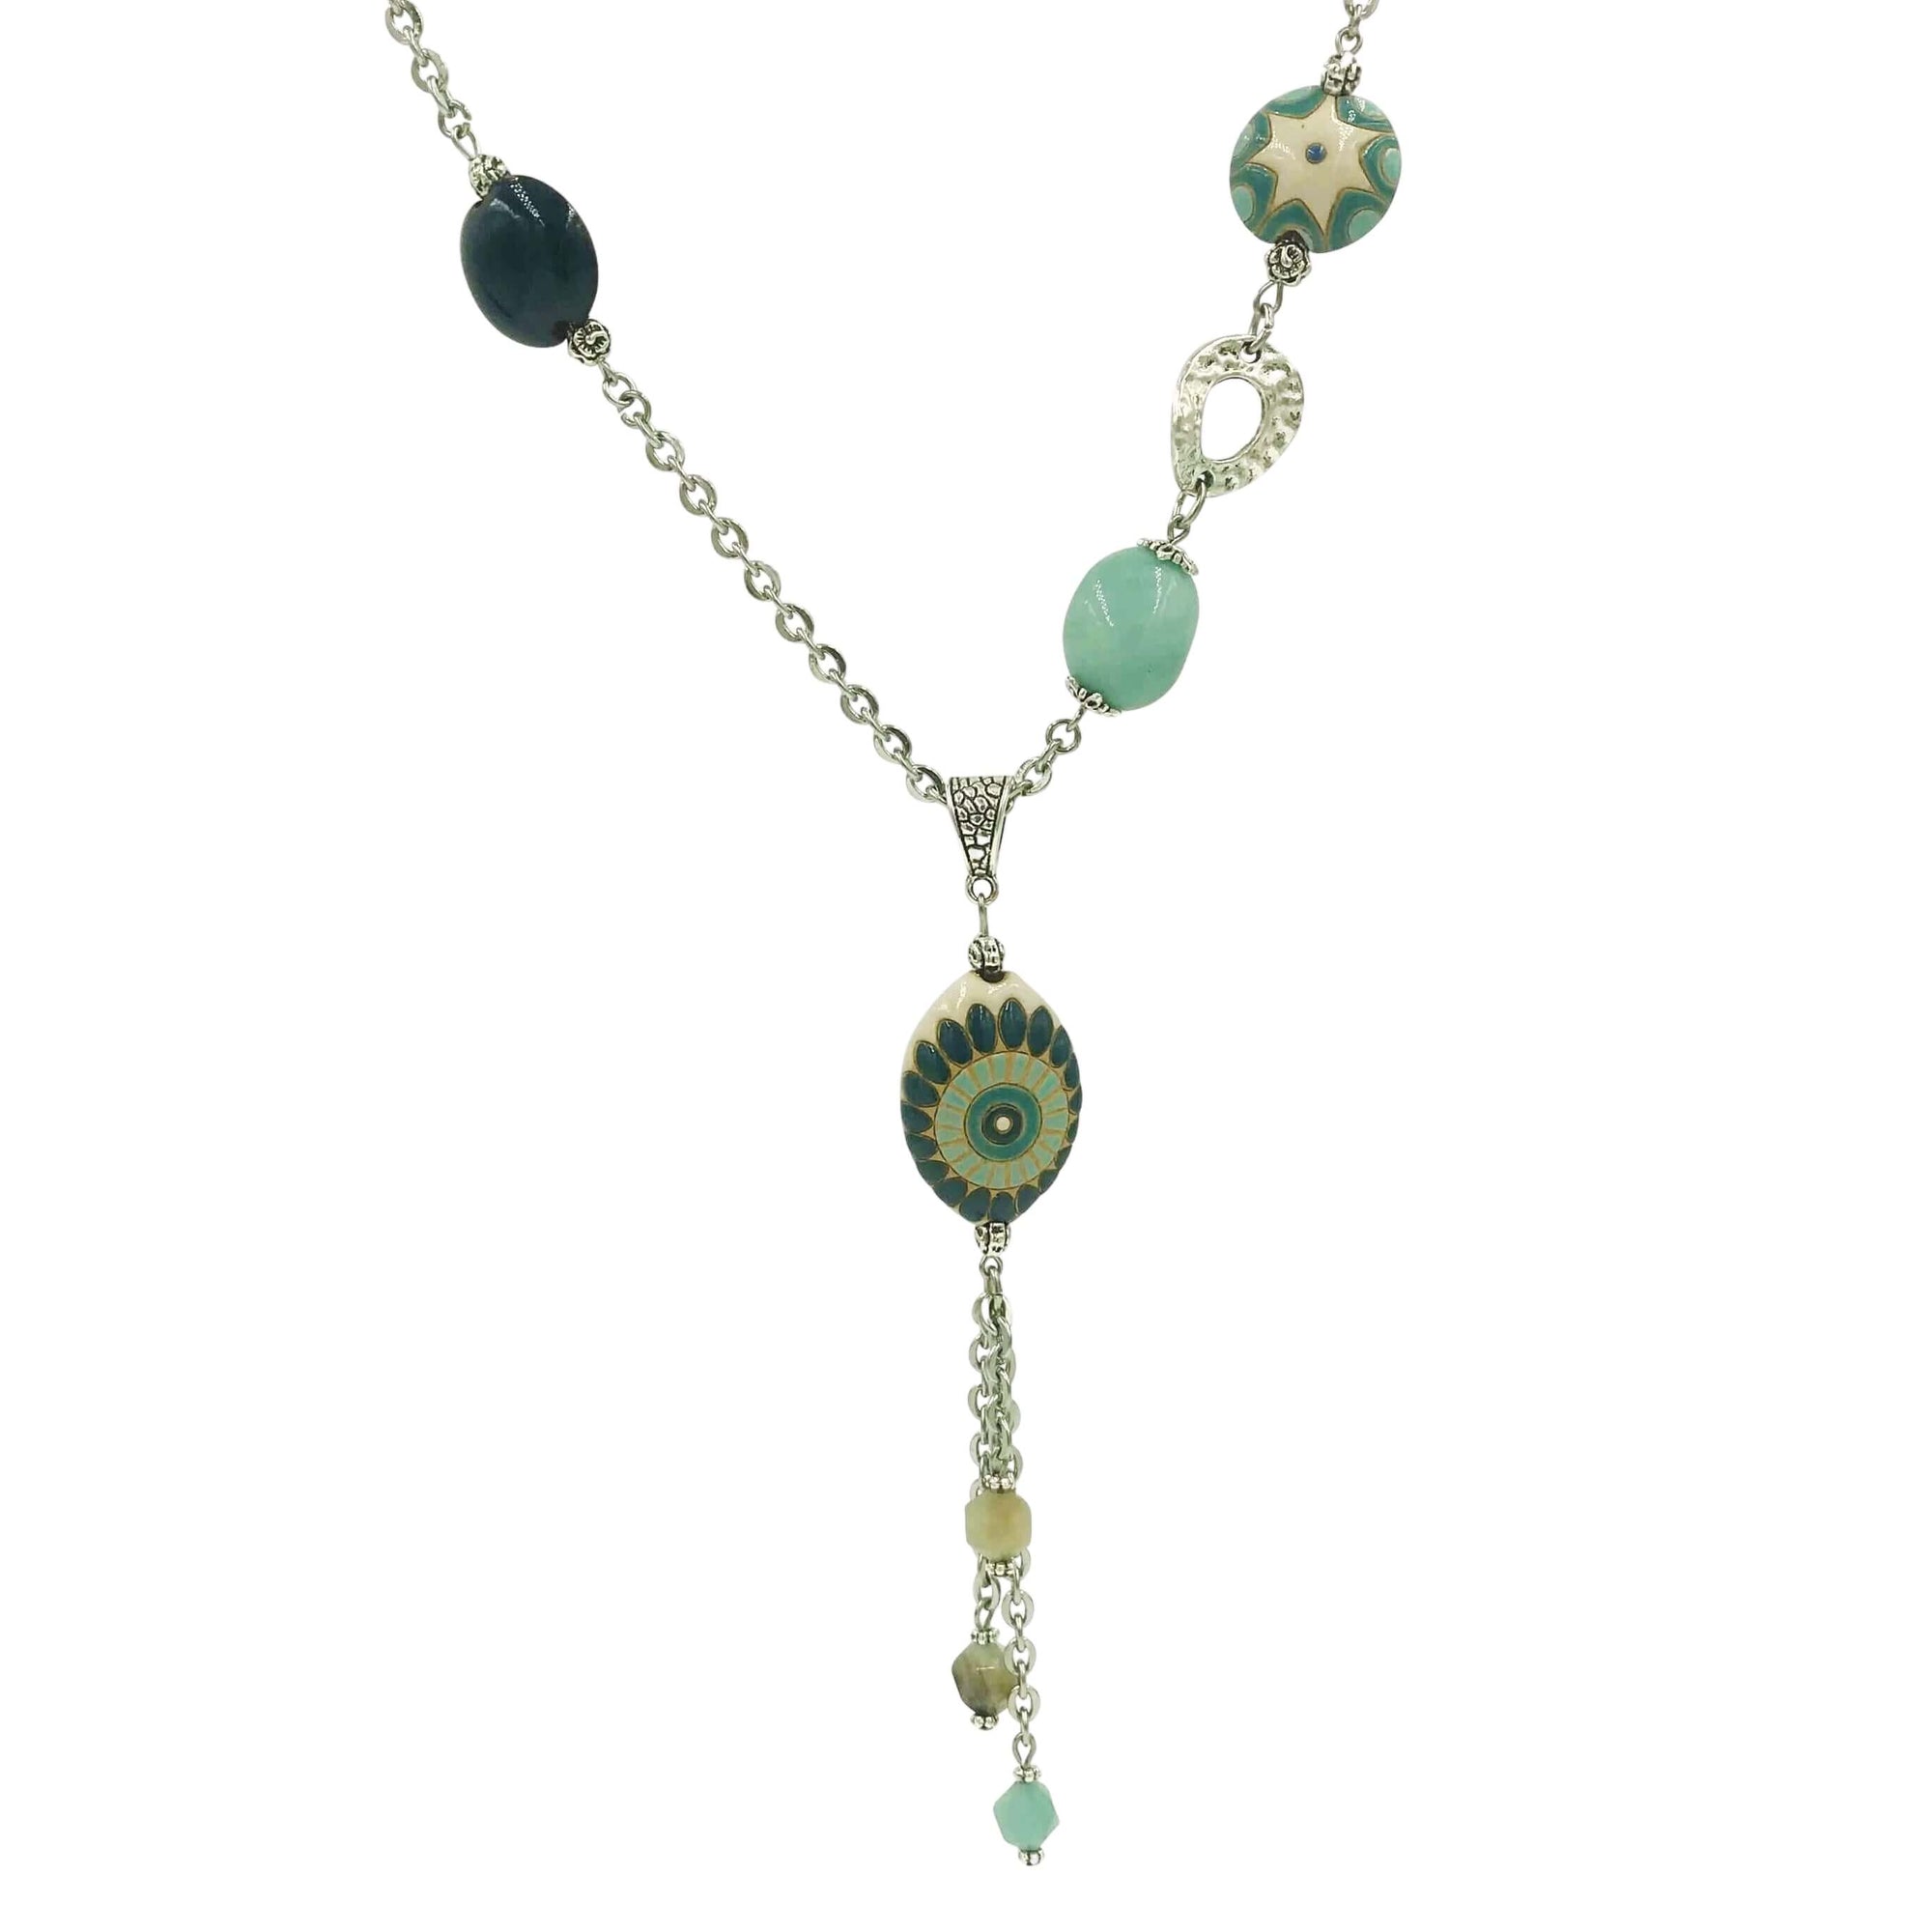 This silver pendant necklace was created using stainless steel chain, stones, pewter beads, and Golem clay beads.